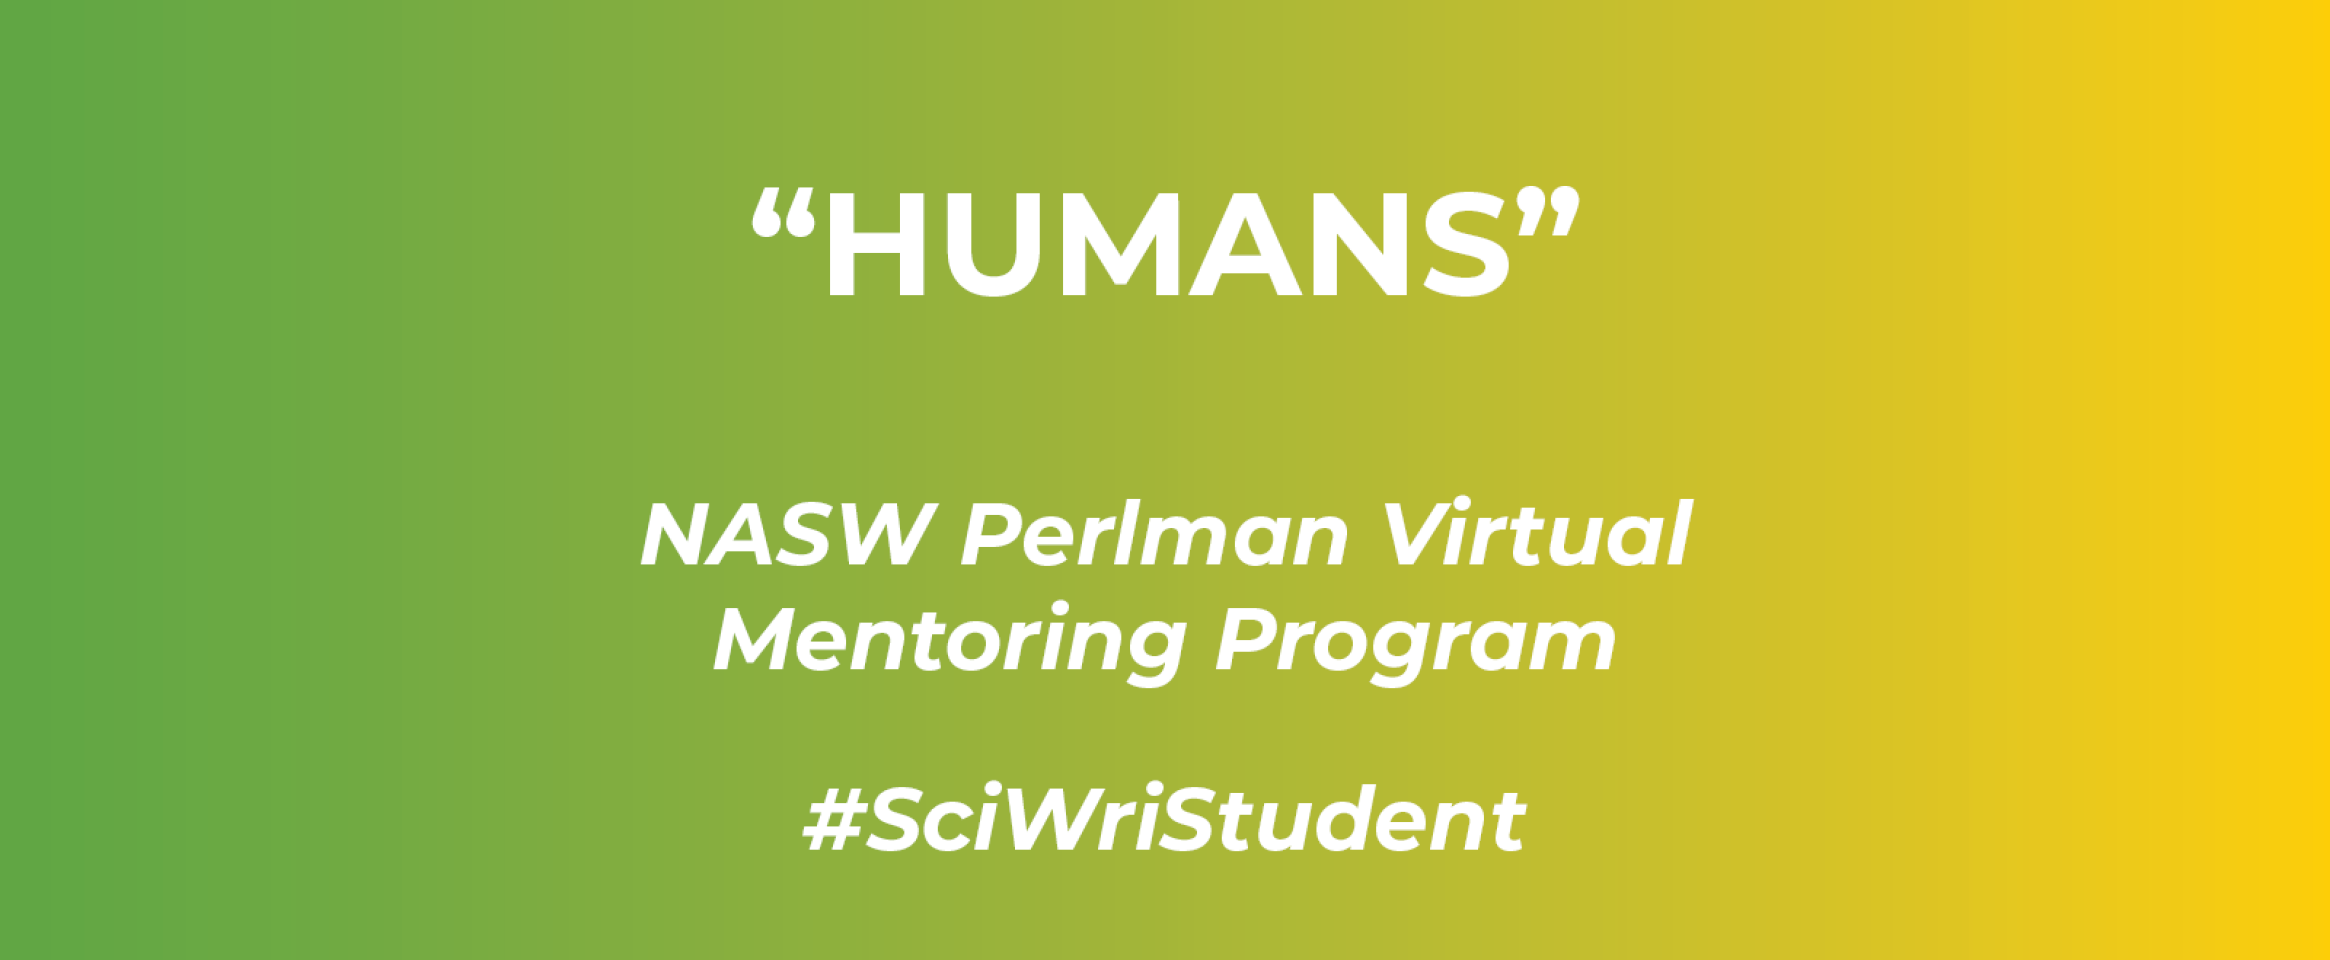 Horizontal graphic with text Humans and N A S W Perlman Virtual Mentoring Program, and hashtag Sci Wri Student